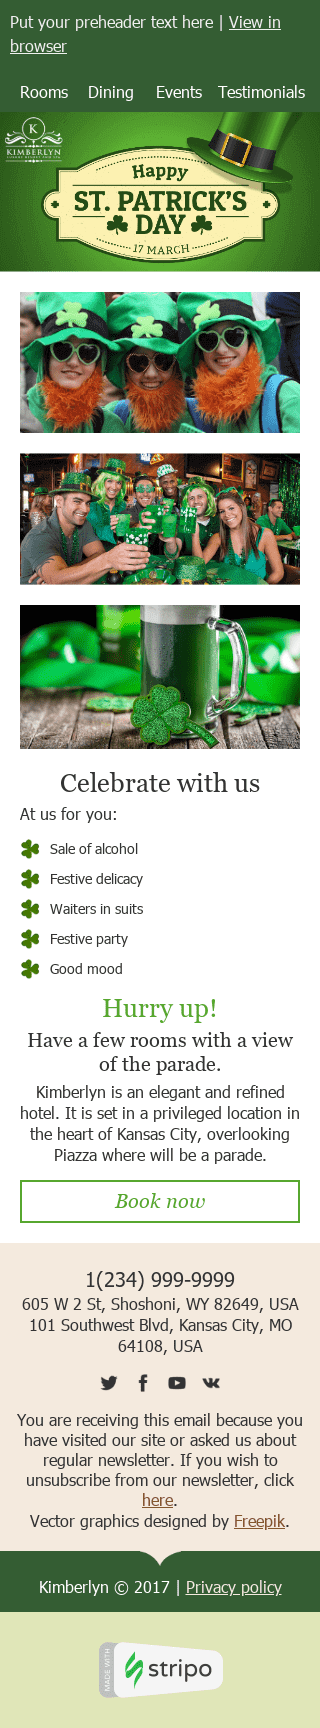 St. Patrick’s Day Email Template "Celebrate with Us" for Hotels industry mobile view